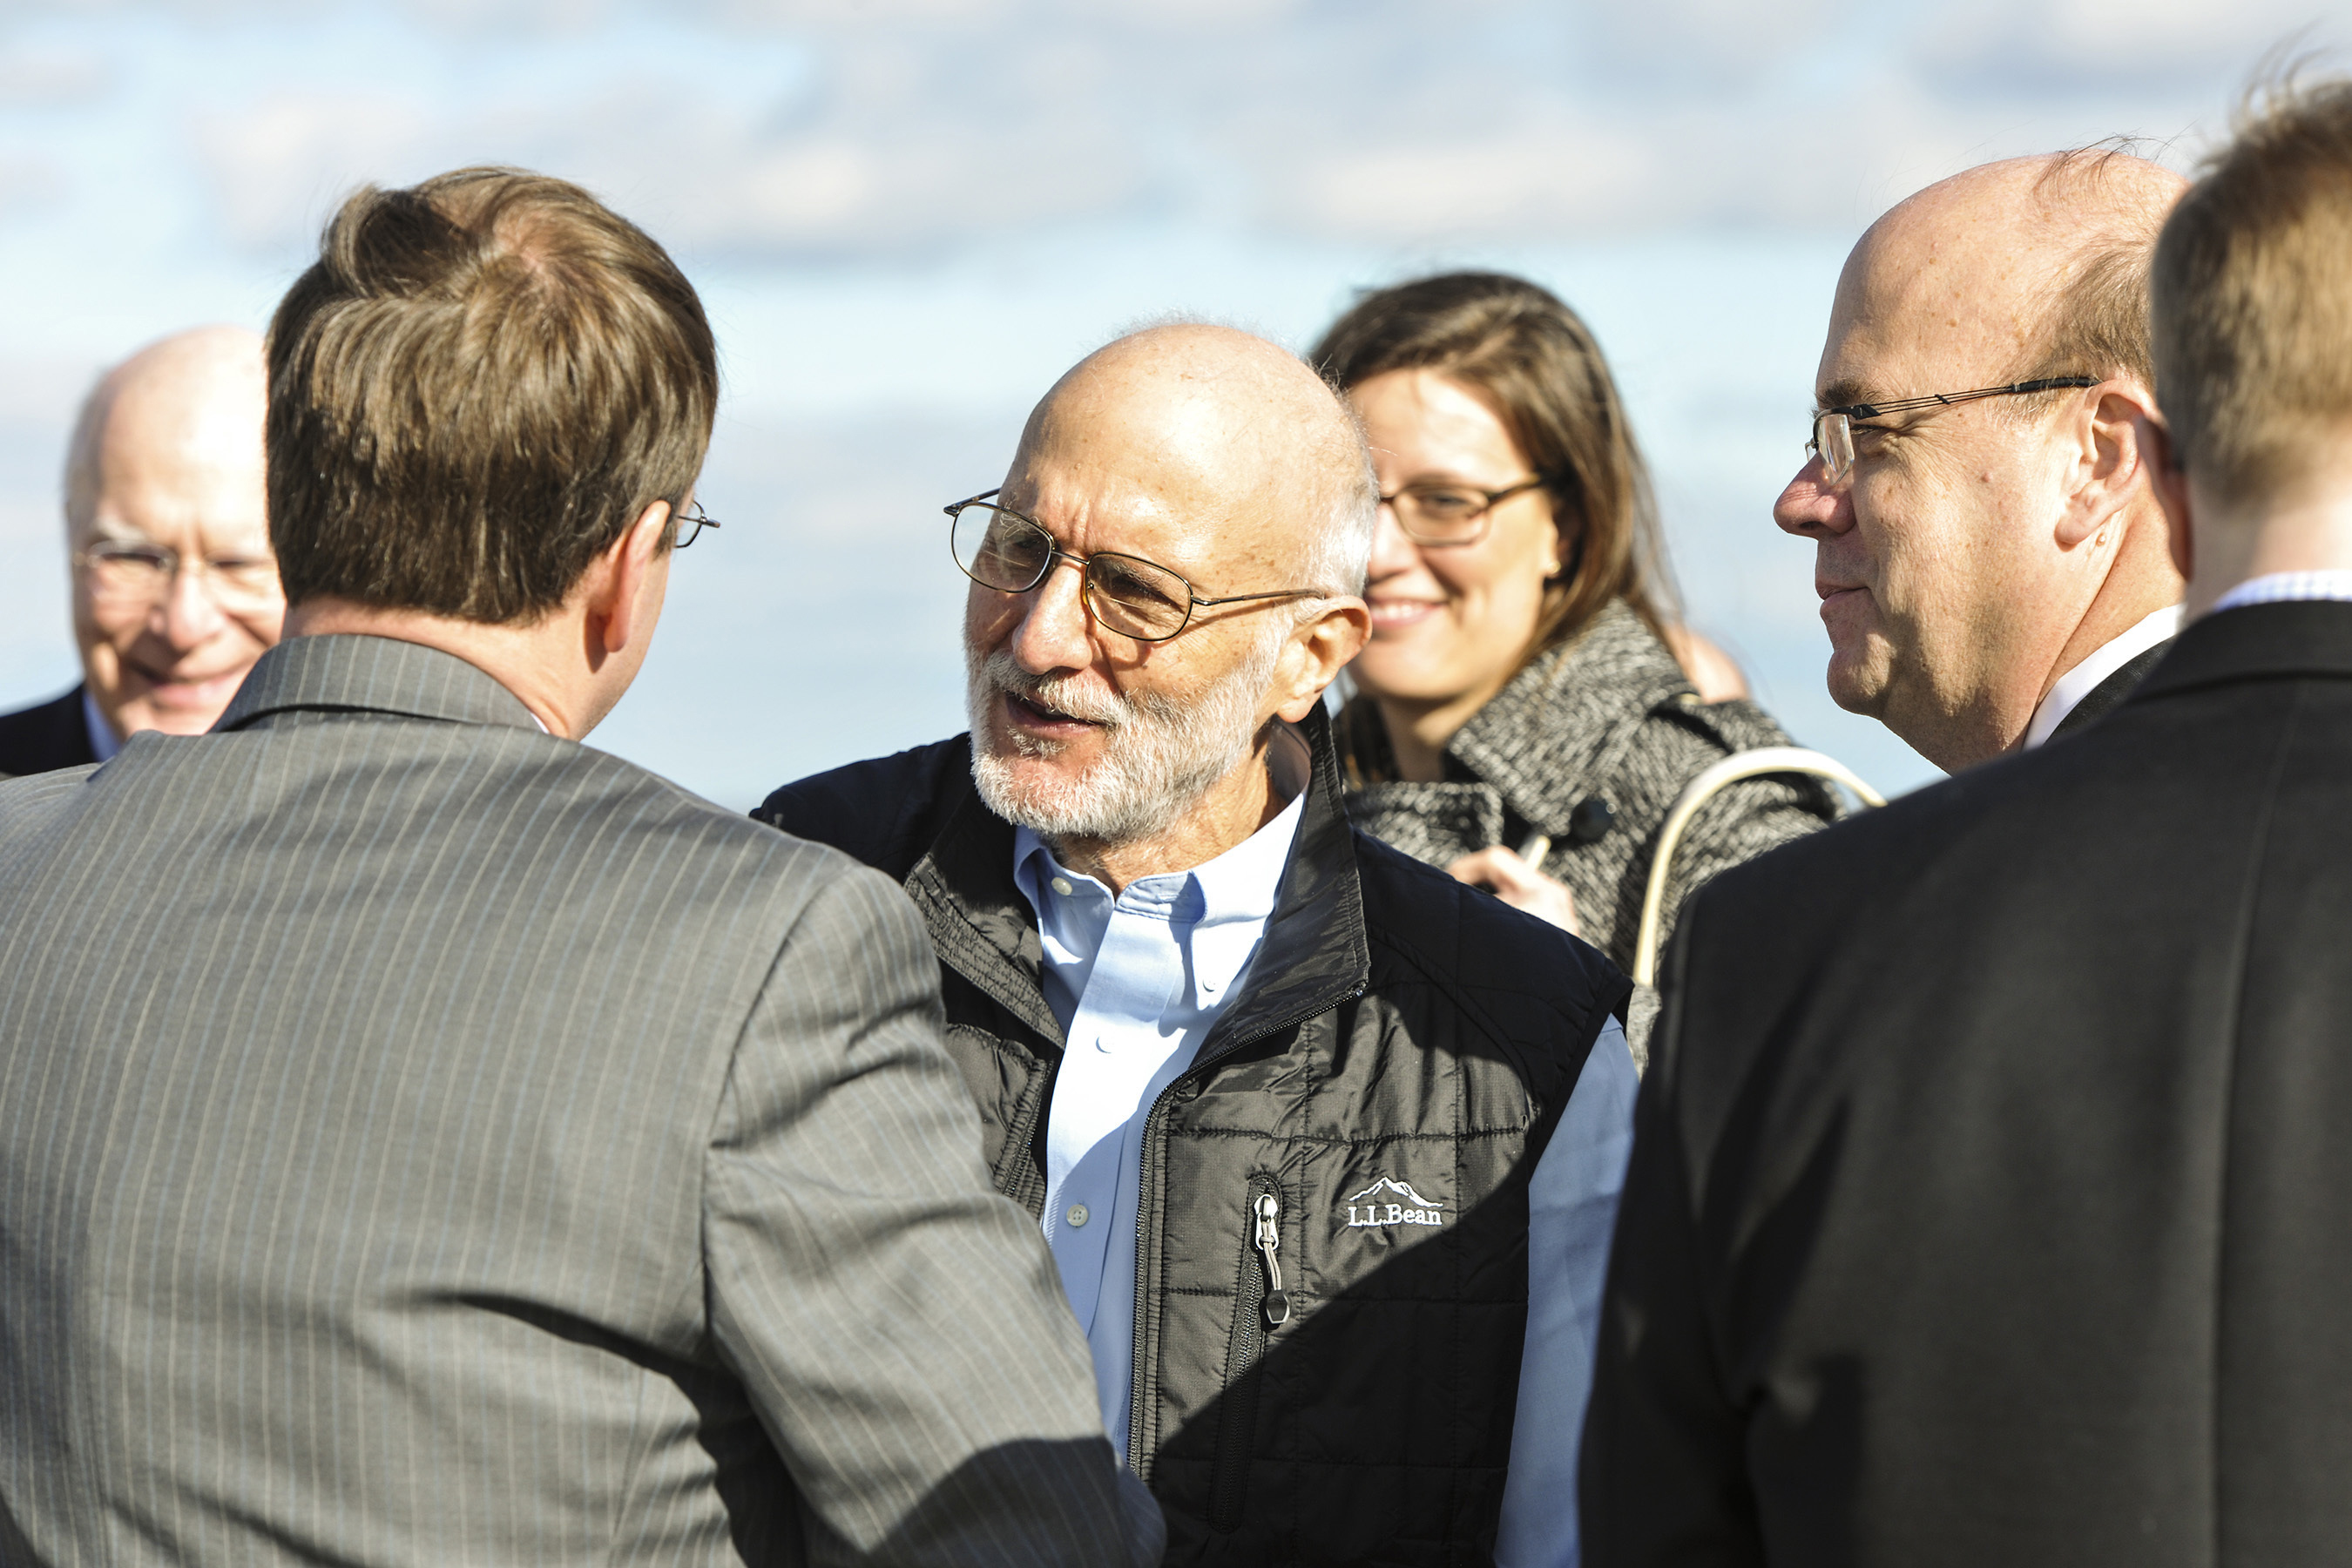 Alan Gross speaks to an entourage of family and friends who were awaiting his return from five years of captivity in Cuba to Joint Base Andrews Maryland